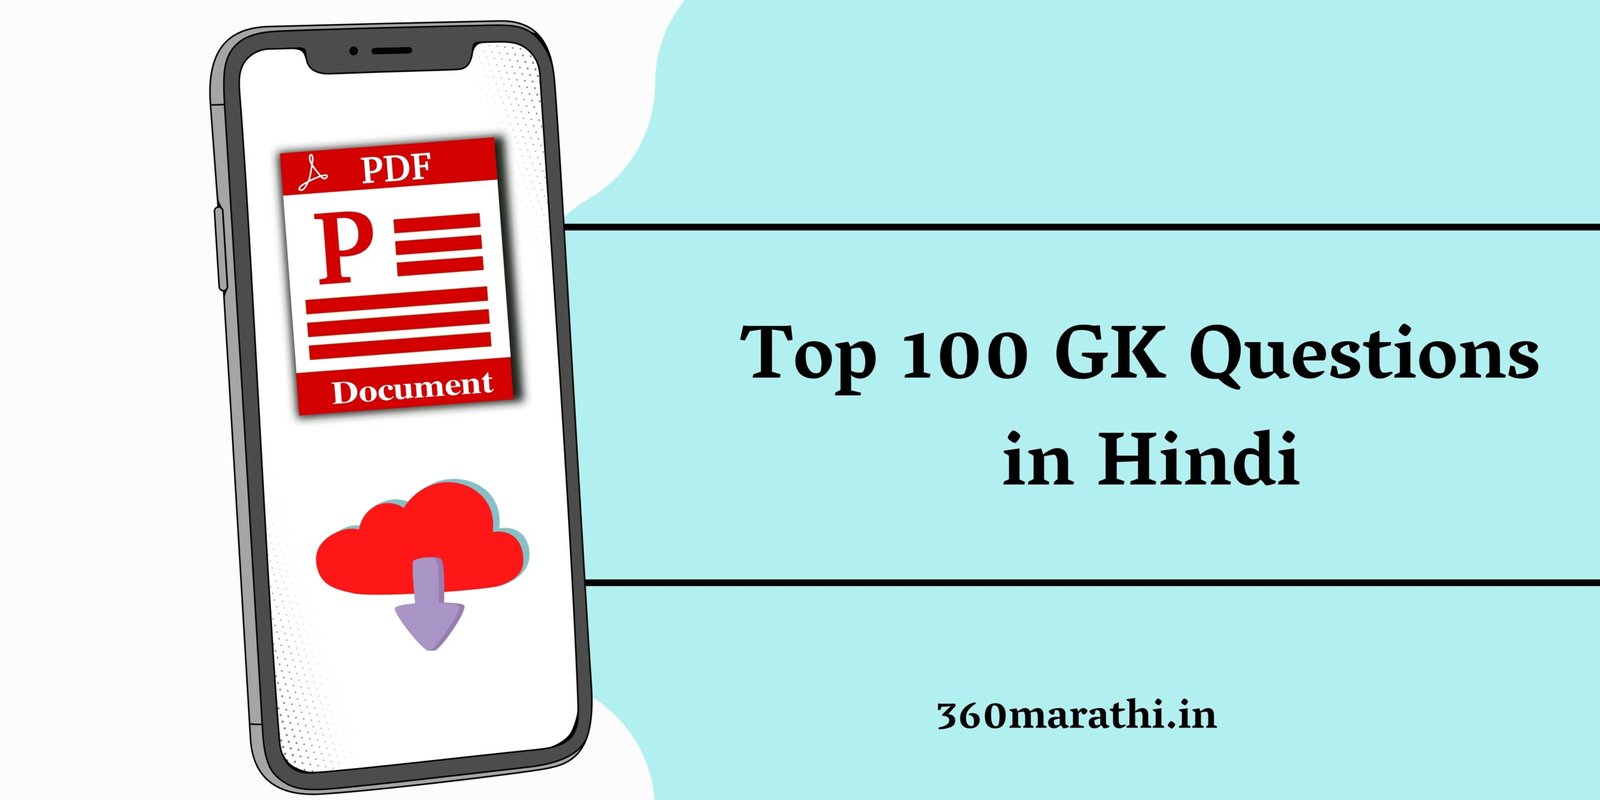 Top 100 GK Questions in Hindi